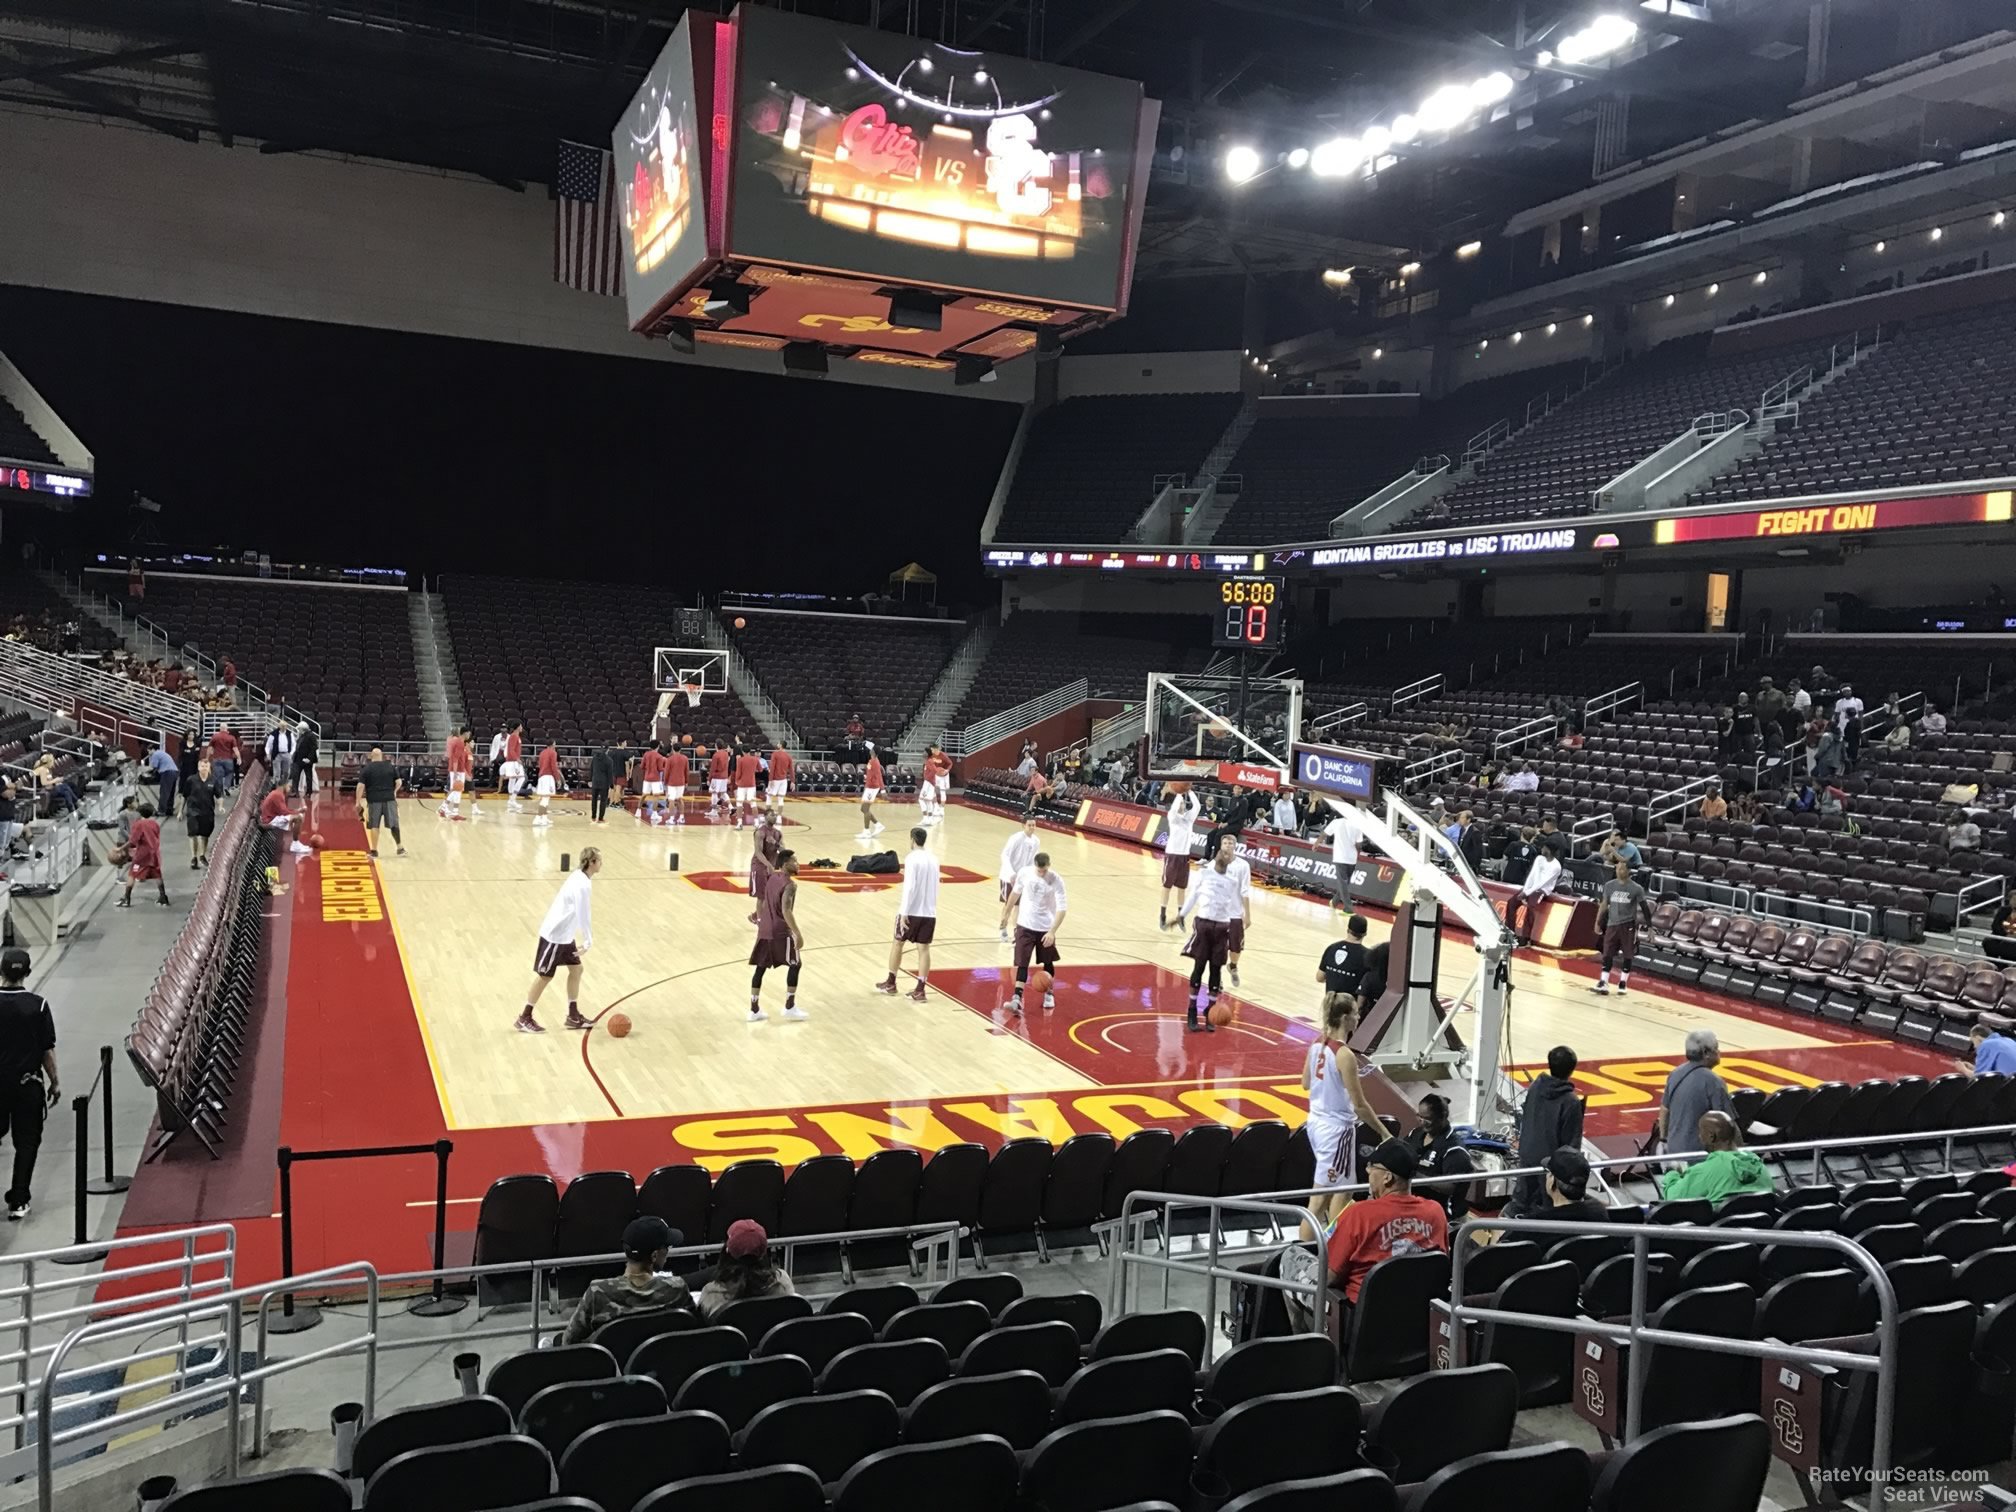 section 109, row 10 seat view  - galen center